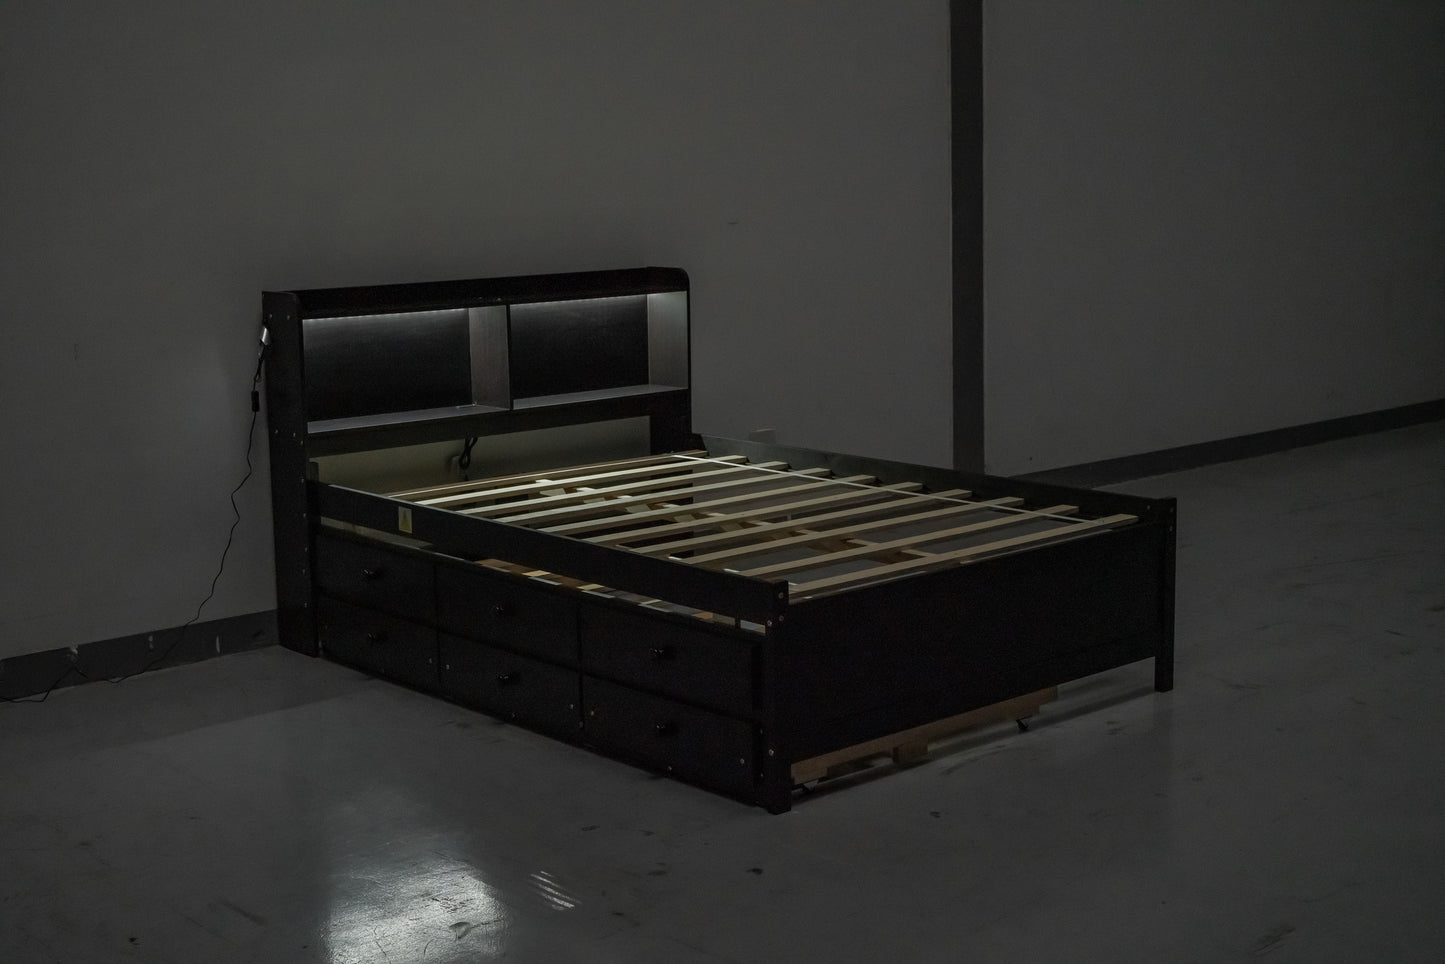 Full Size Platform Bed with USB & Type-C Ports, LED light, Bookcase Headboard, Trundle and 3 Storage Drawers, Espresso